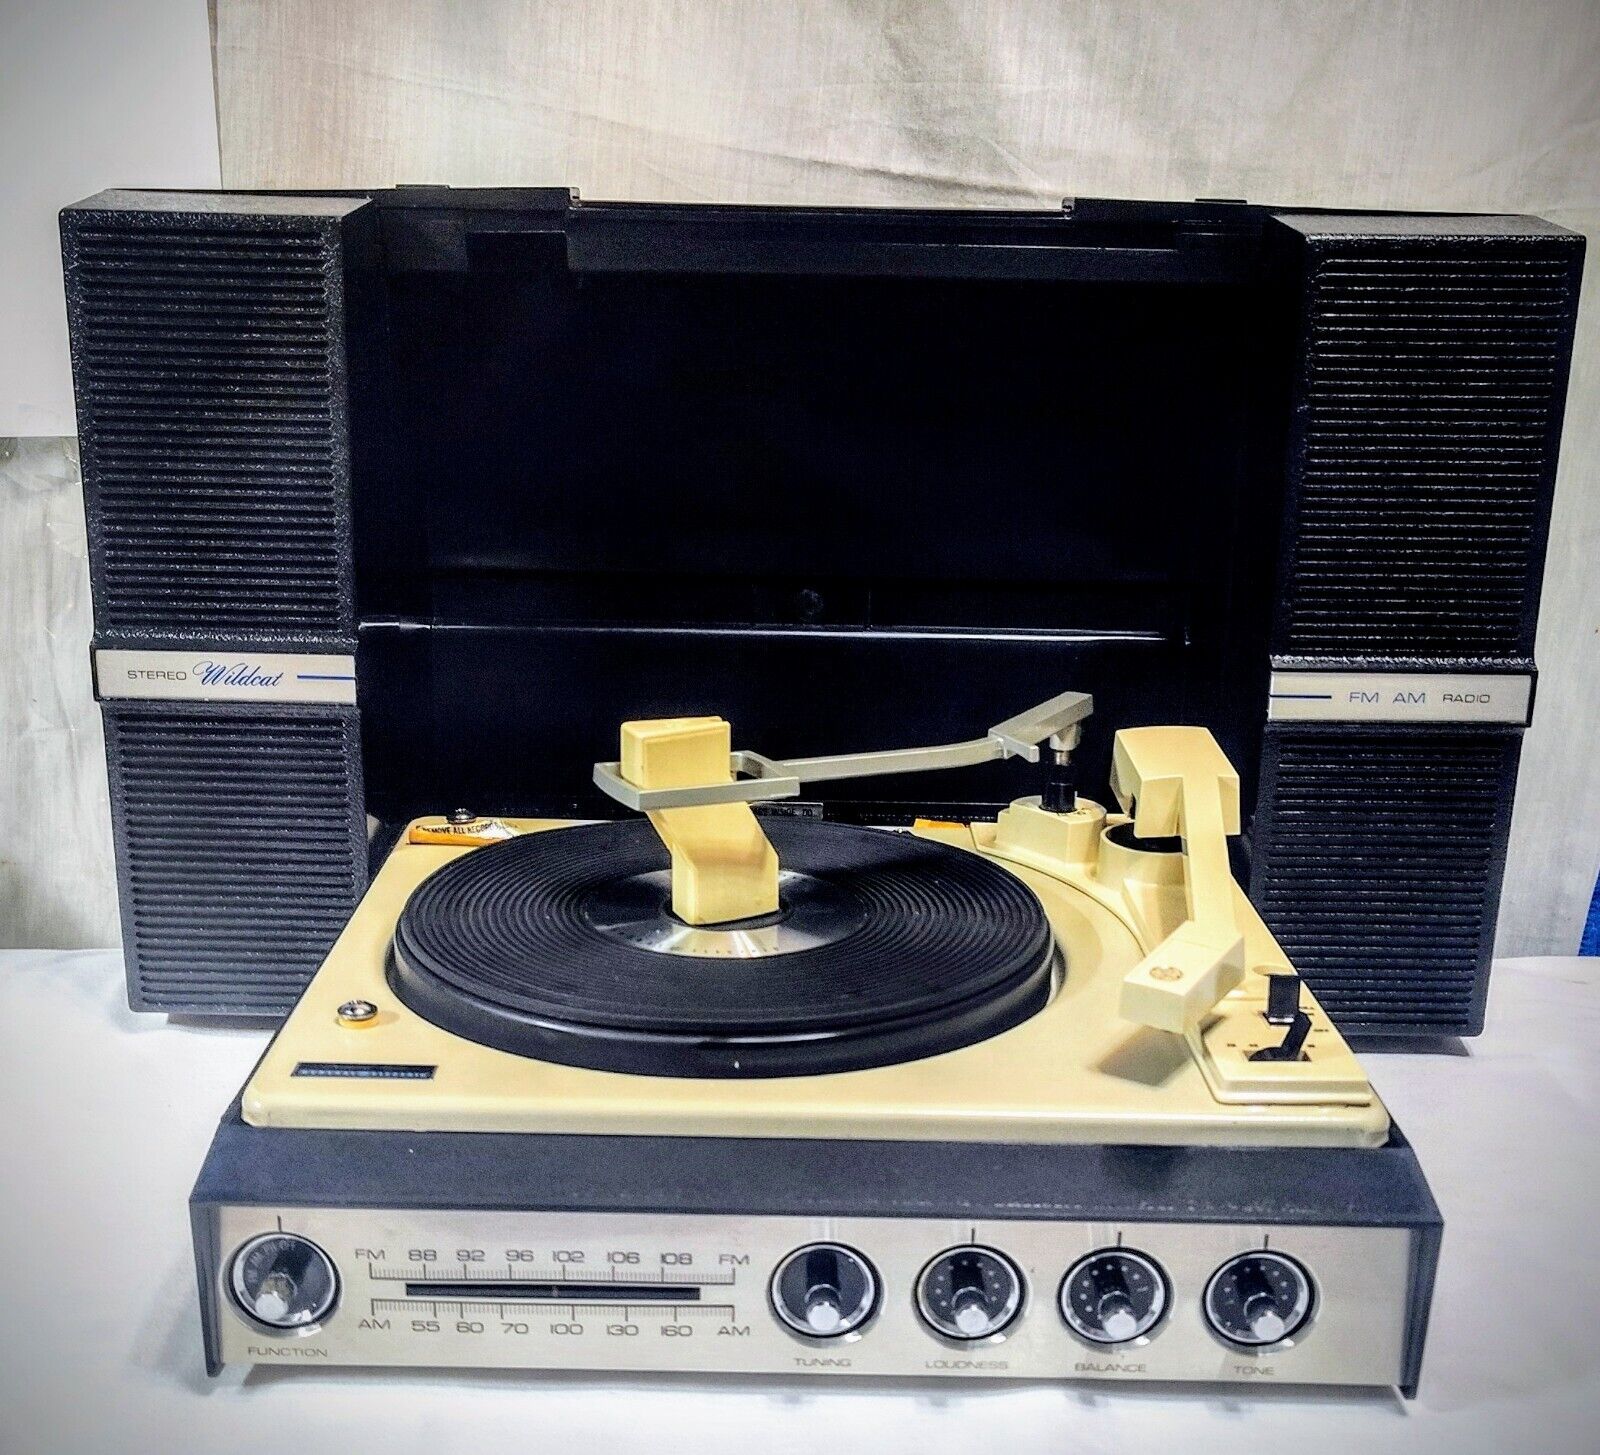 Vtg GE Wildcat Portable FM/AM Stereo Record Player Model No. V952G Excellent...